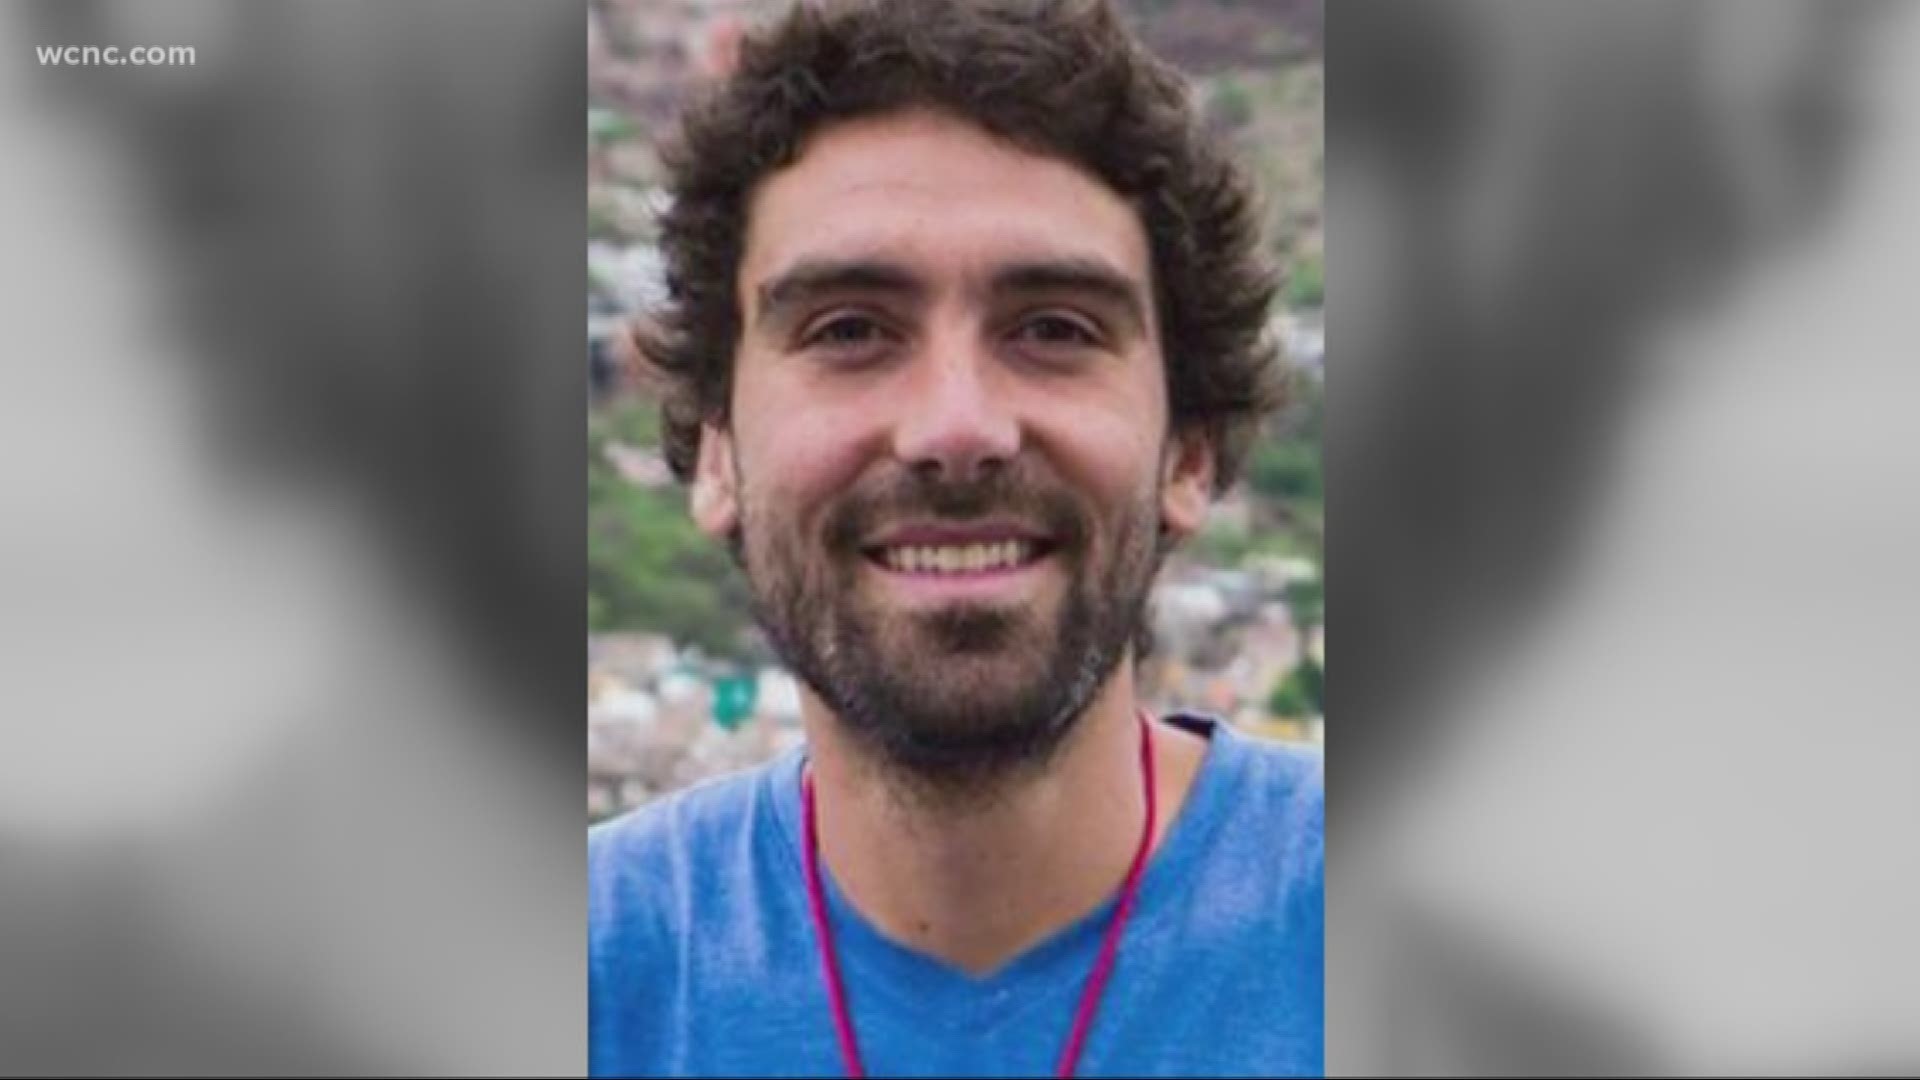 Patrick Braxton-Andrews teaches Spanish at Woodlawn School in Mooresville. He was last spotted in a northern Mexico town on October 28.